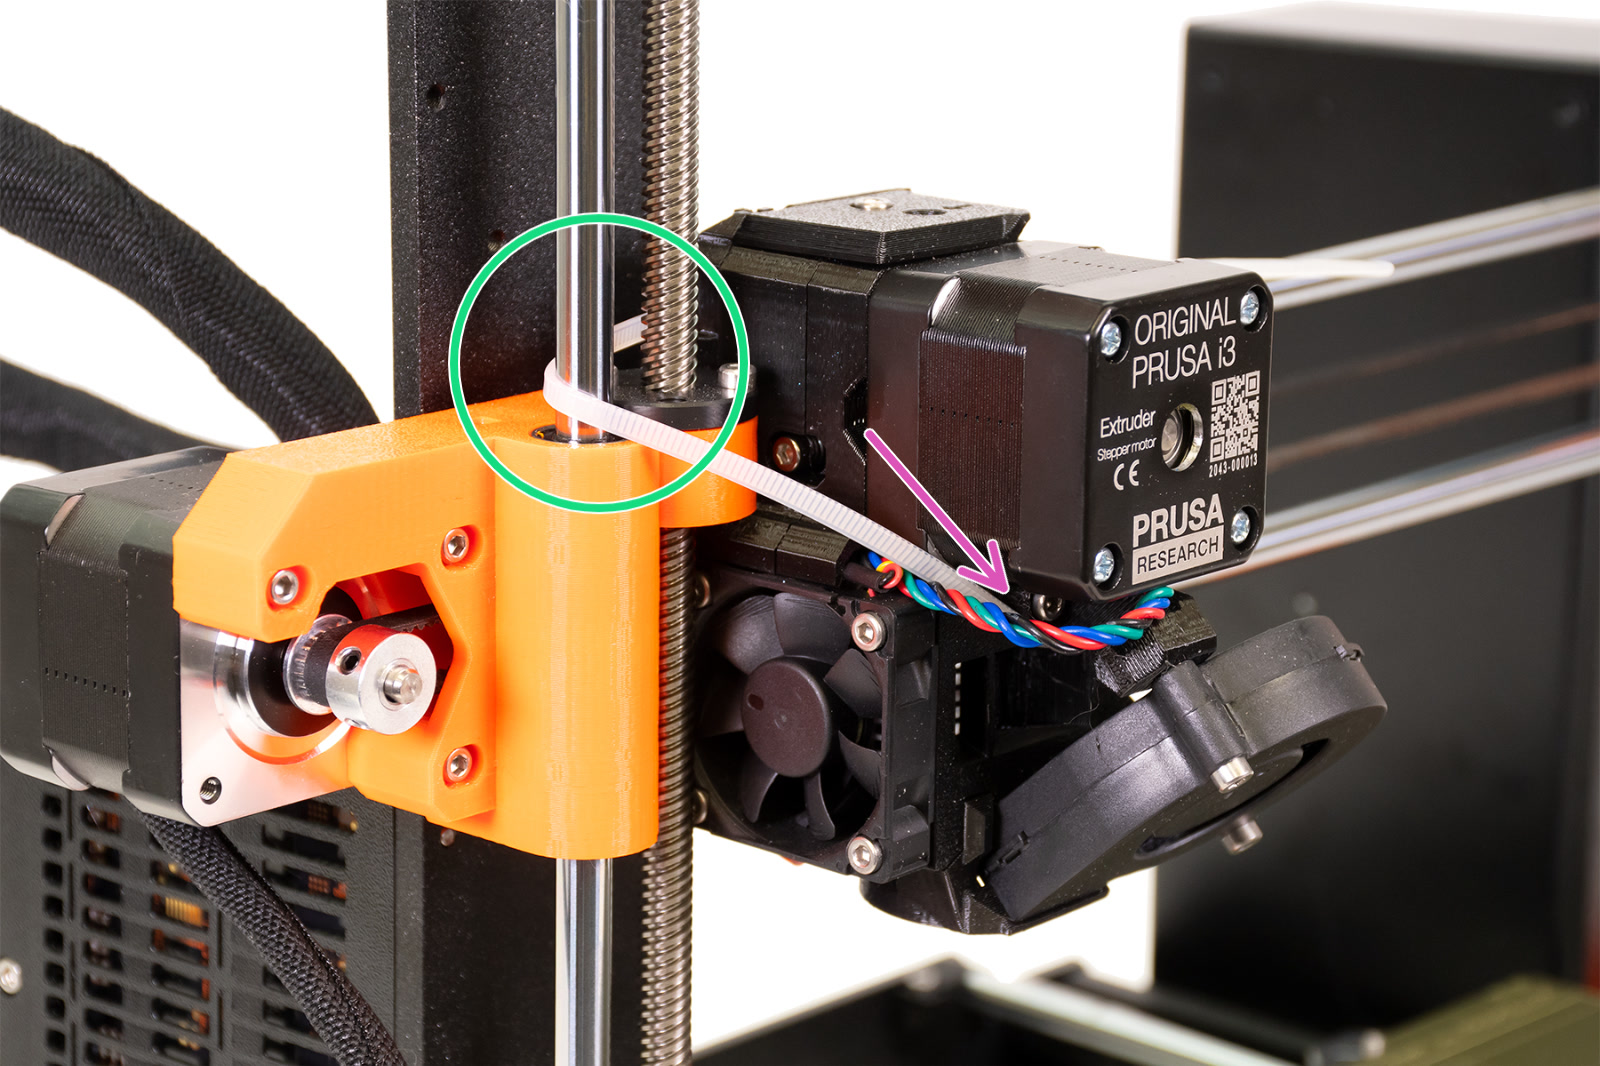 Securing the extruder with zip-ties (Part 1)